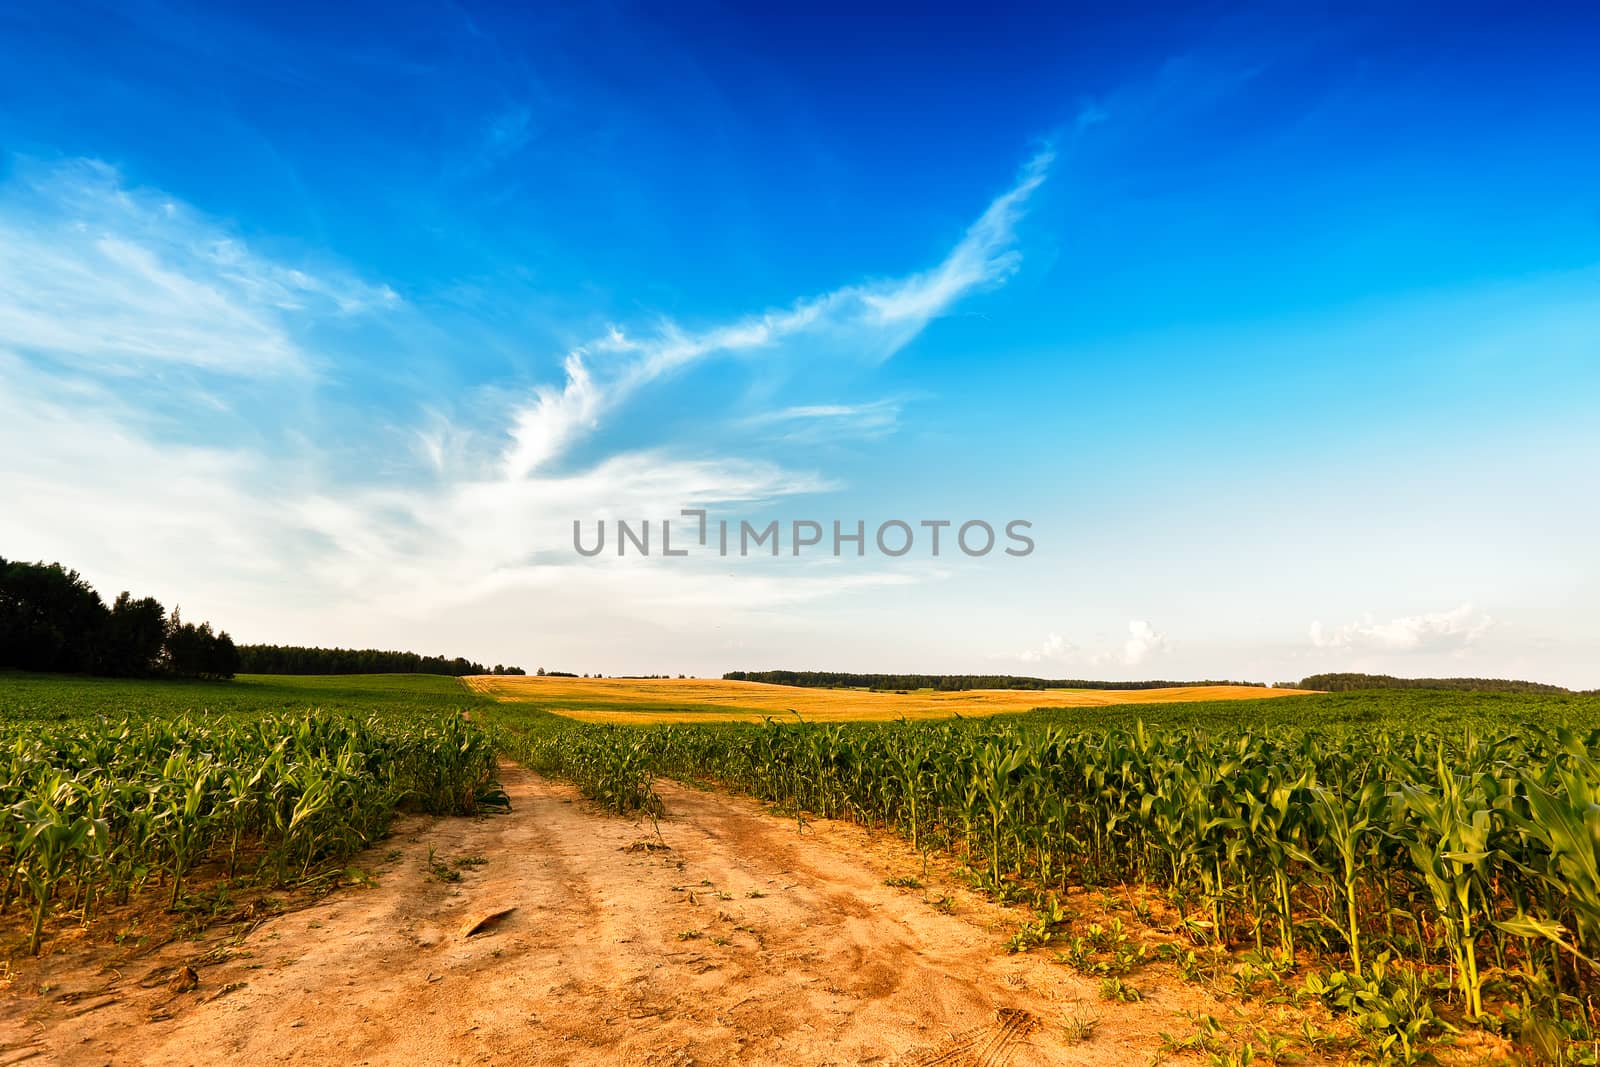 Summer landscape with green corn cereals field. Ground road and clouds. Design element. Dirt road leading off into the distance.